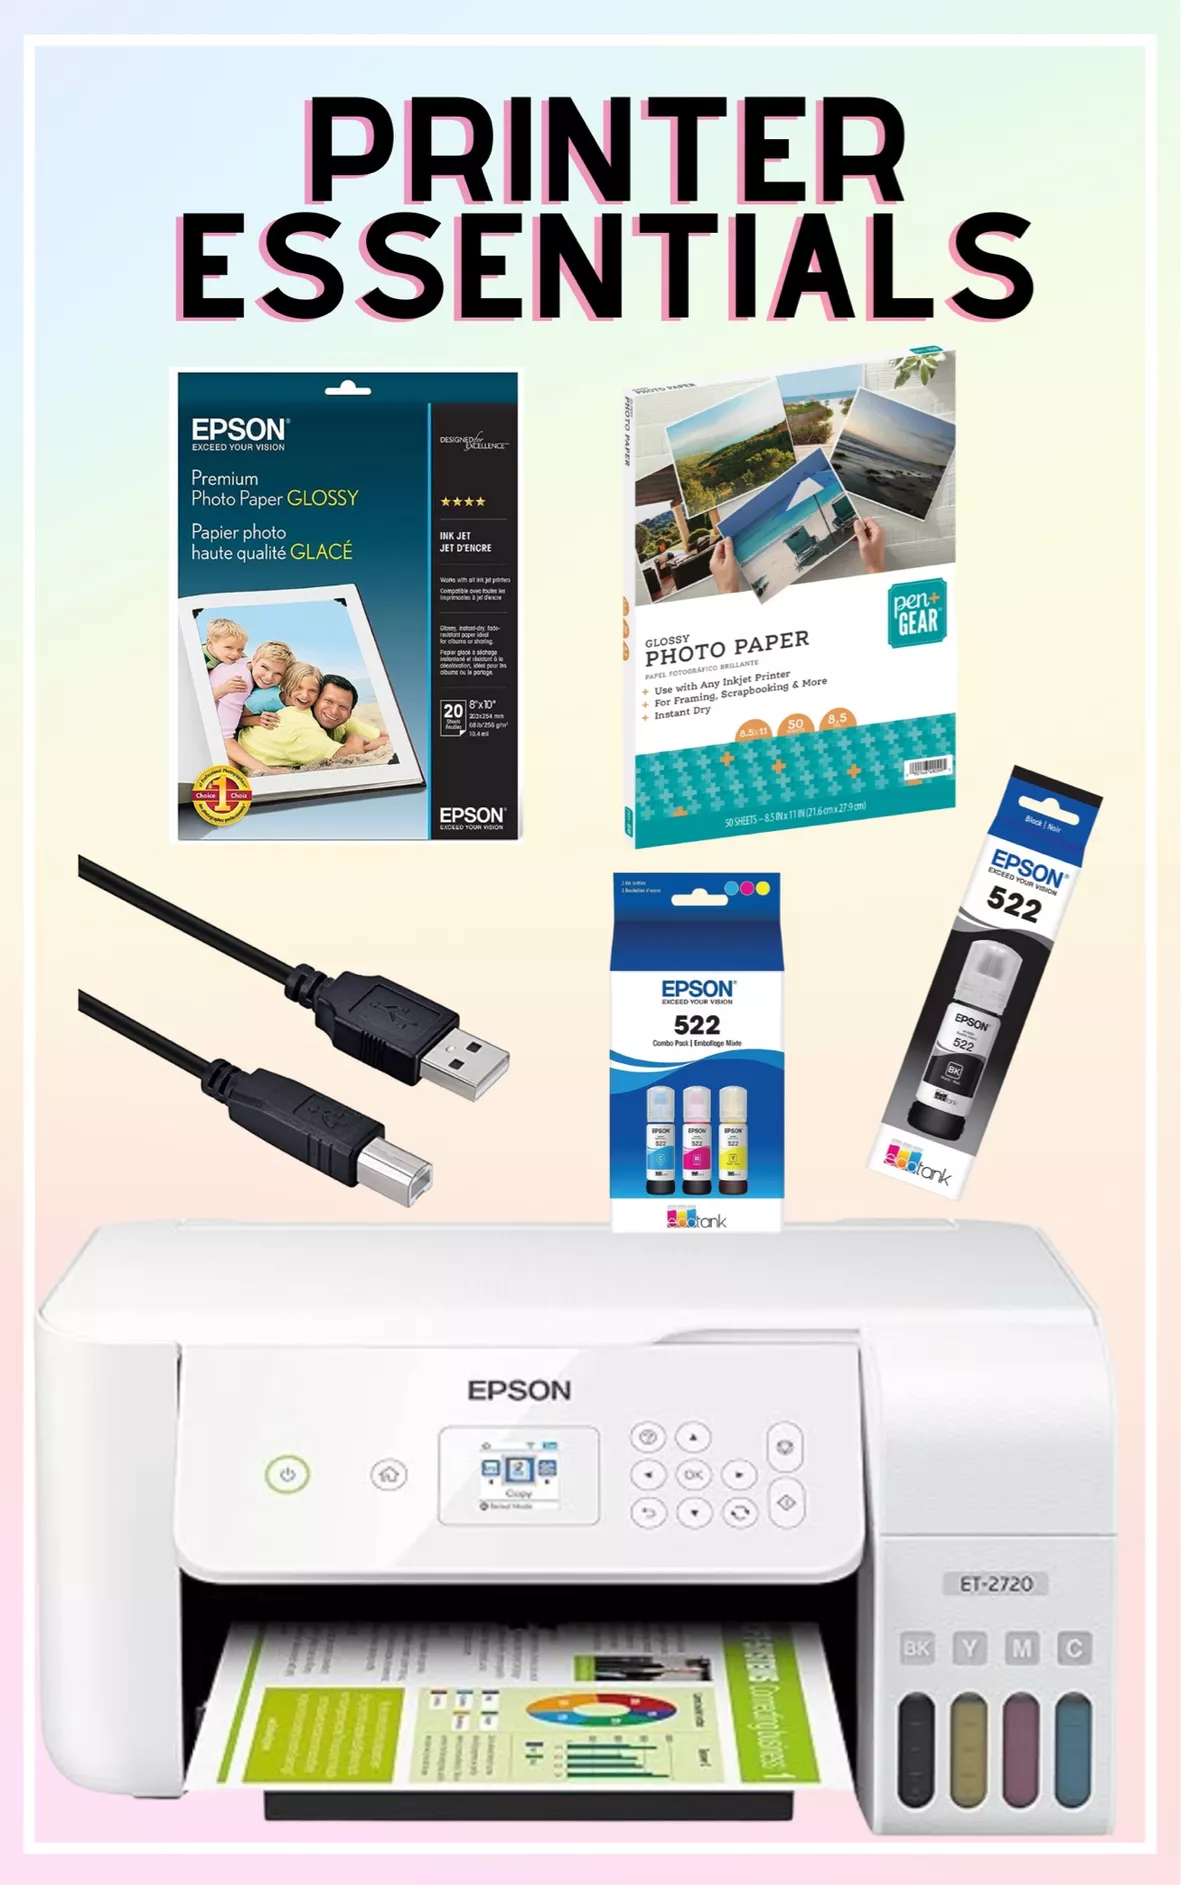 Epson - photo paper - glossy - 20 sheet(s) - - S041465 - Paper